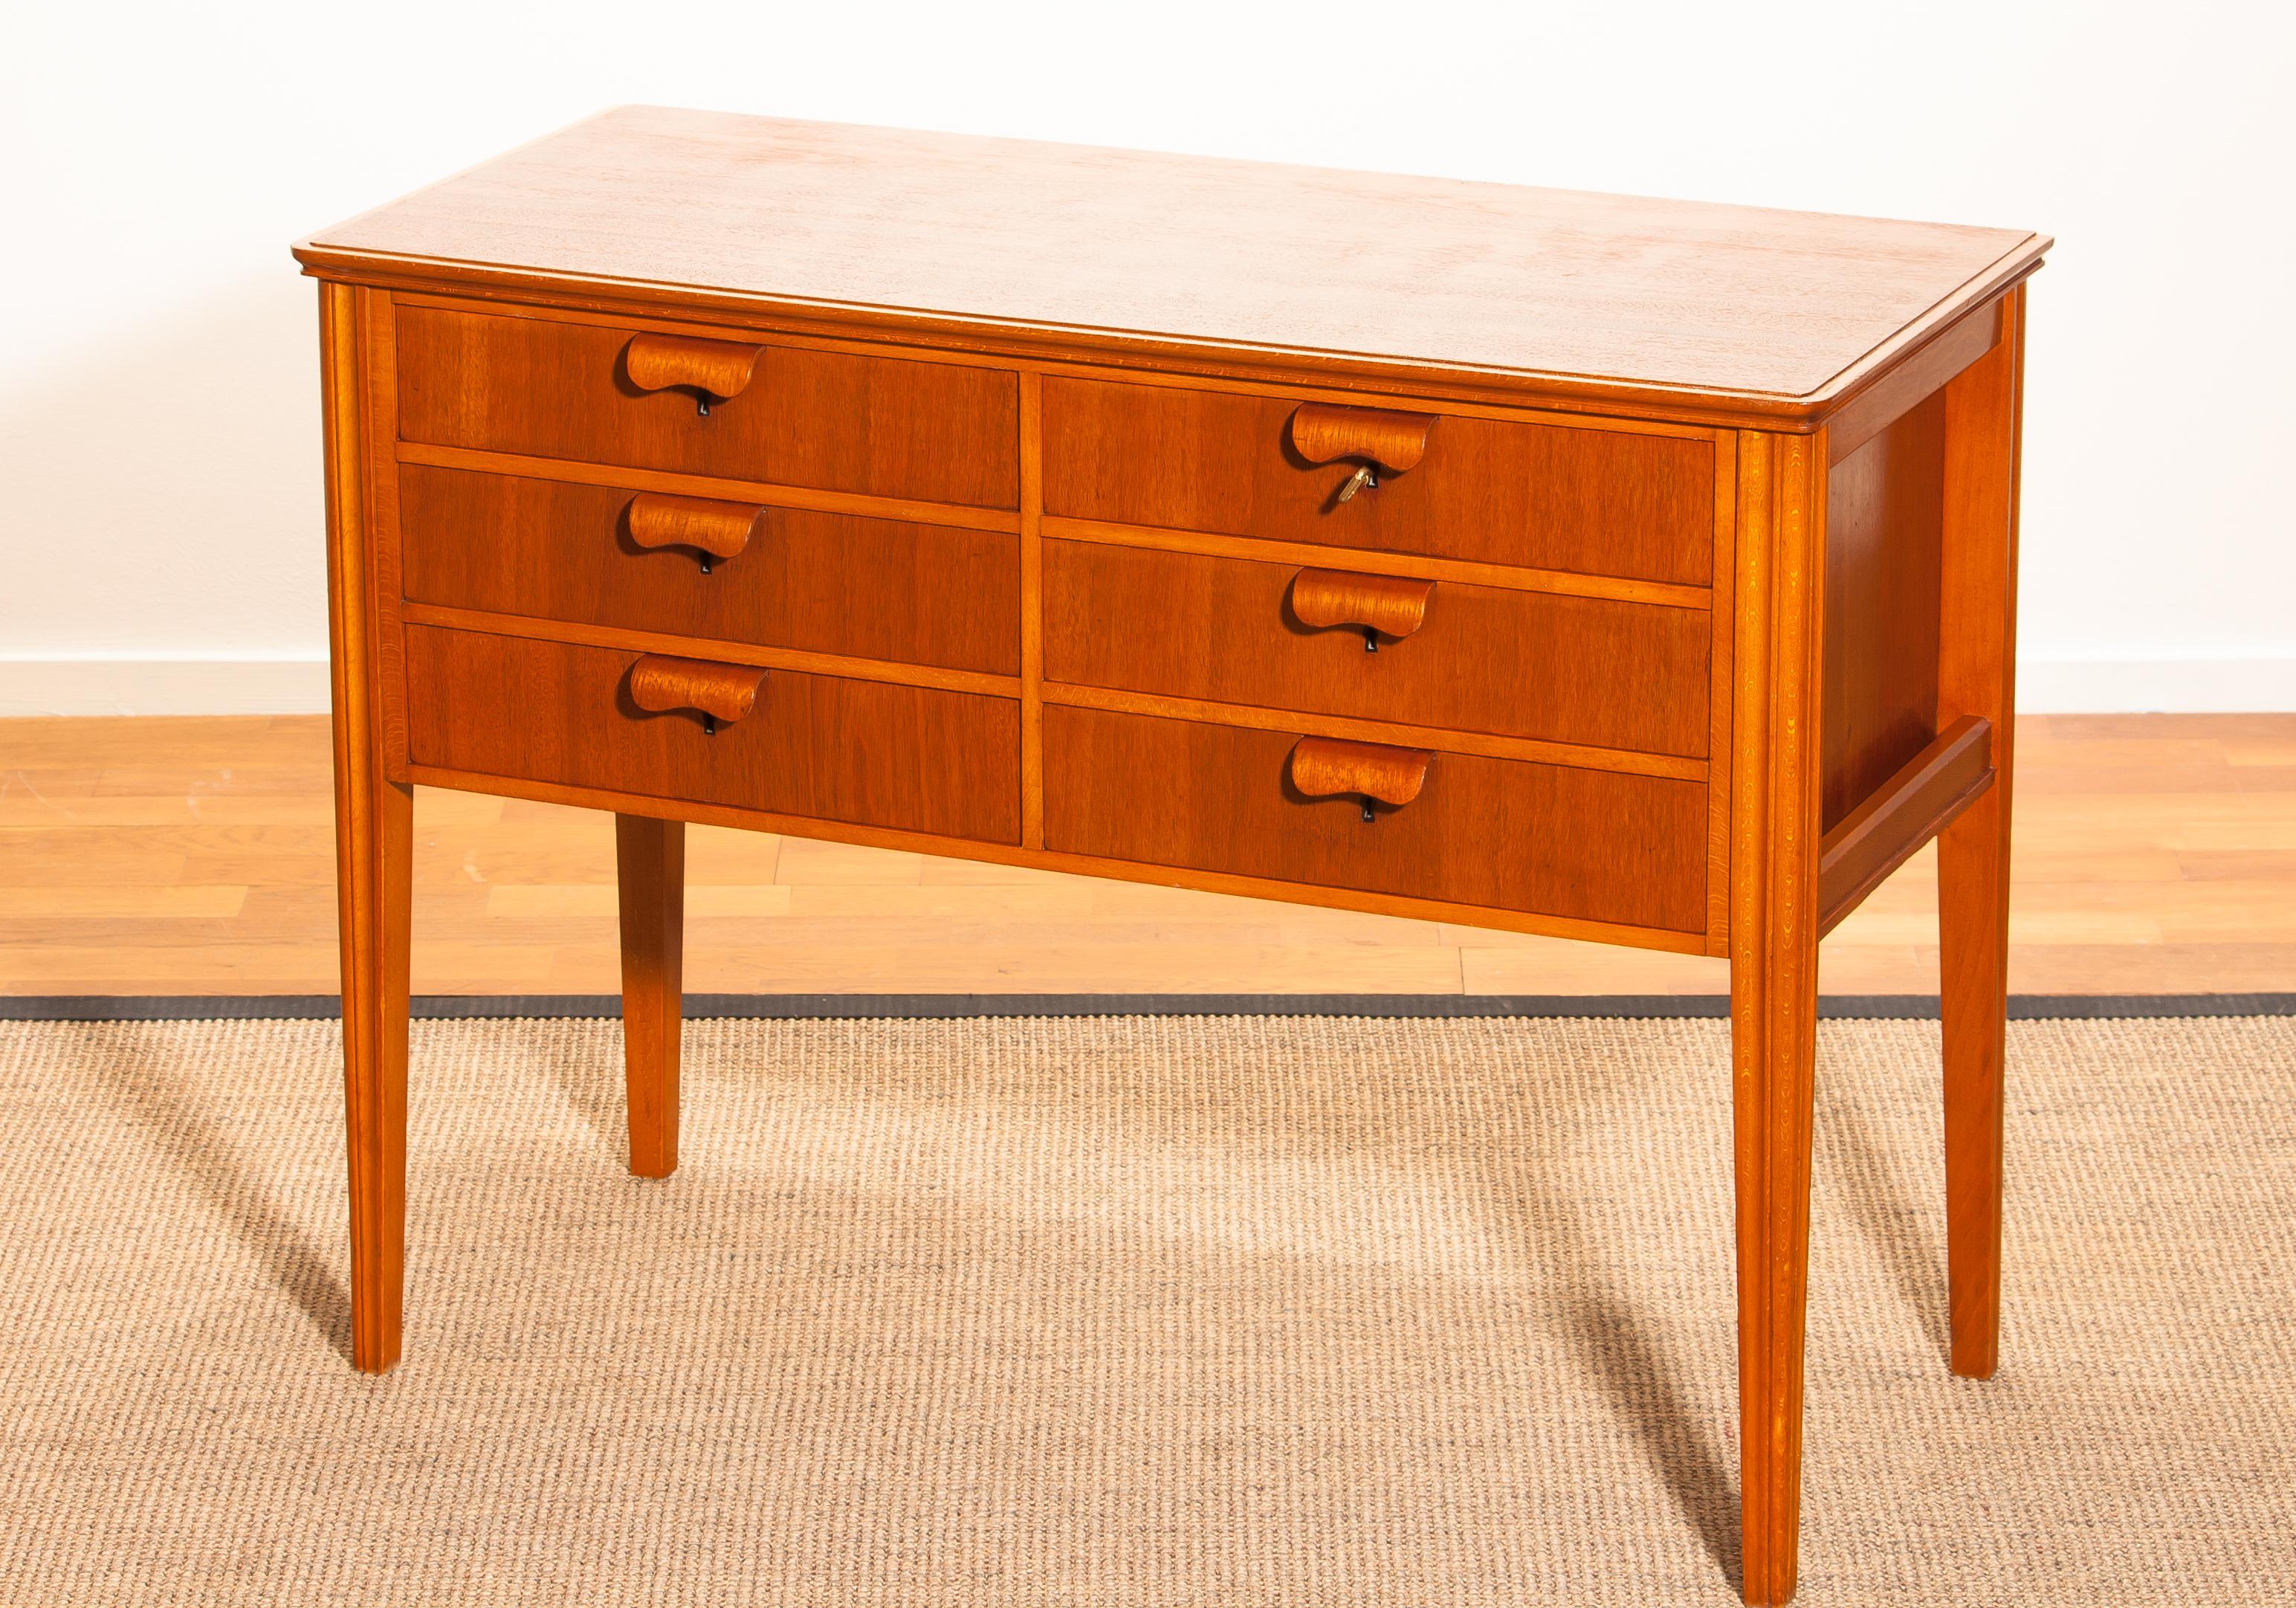 Beautiful chest of drawers made by Ferdinand Lundquist, Sweden.
This cabinet is made of teak and beech and has six drawers.
It is in excellent condition.
Period, 1950s.
Dimensions: H 72 cm, W 96 cm, D 43 cm.